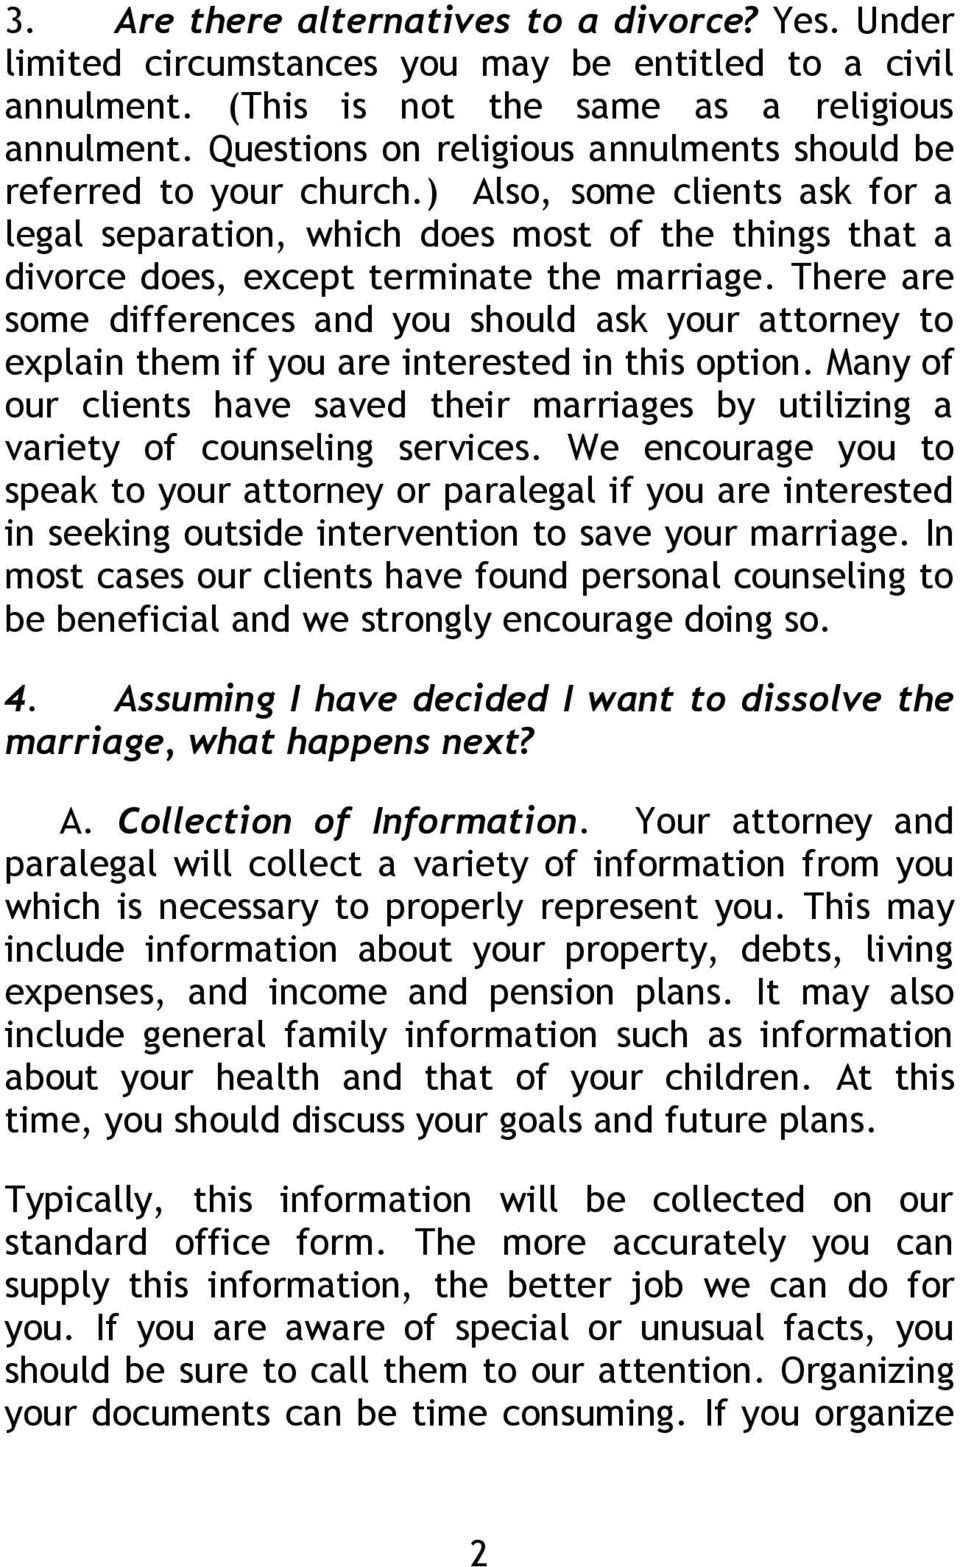 There are some differences and you should ask your attorney to explain them if you are interested in this option.